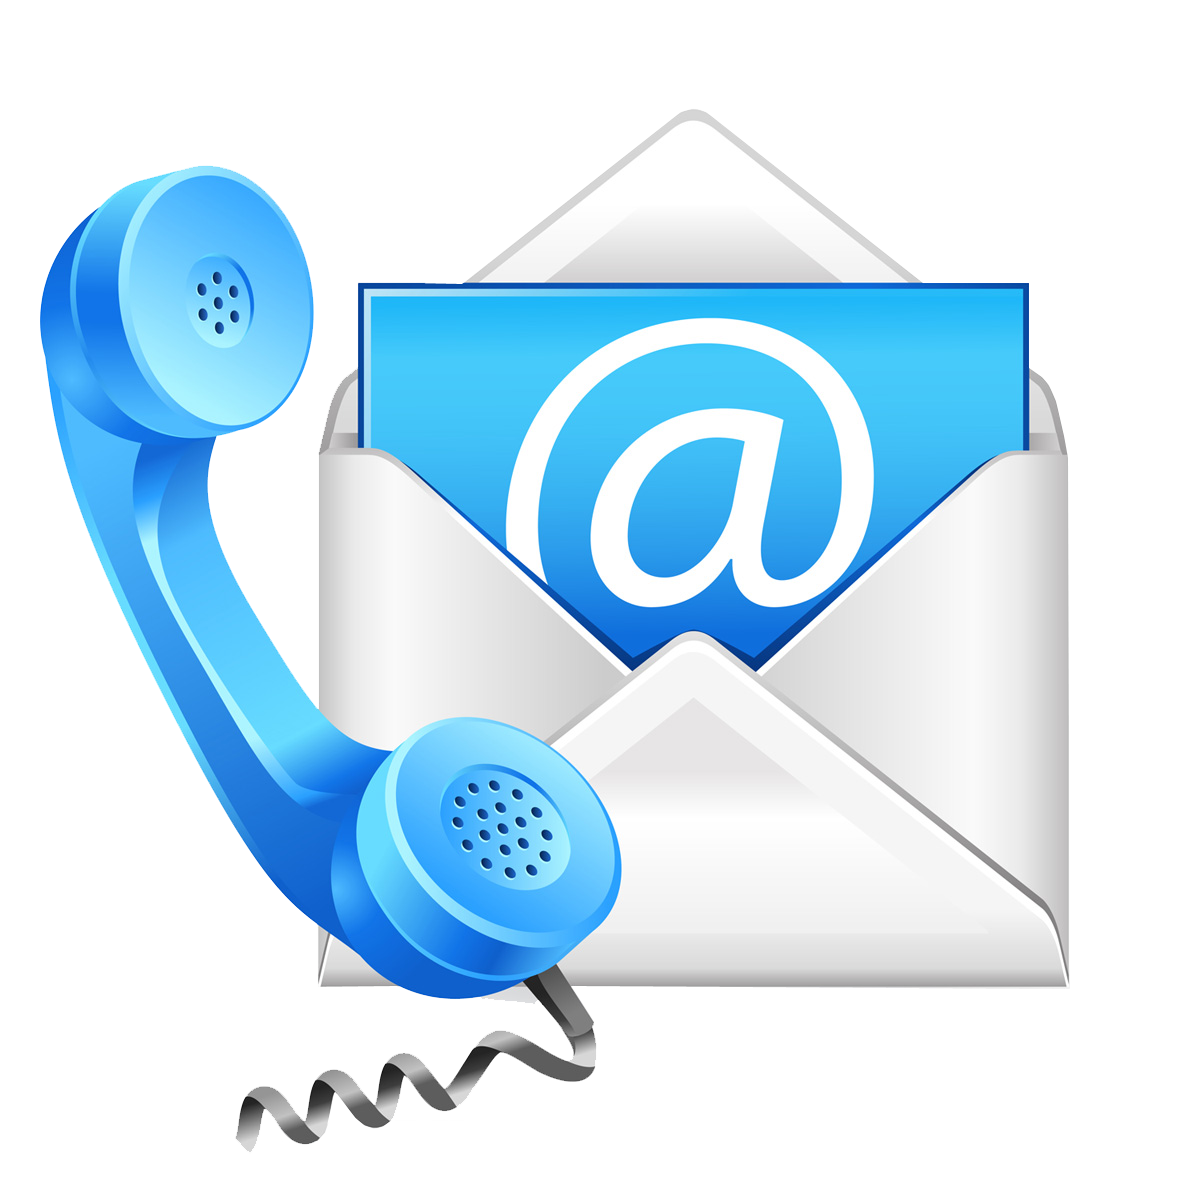 Would you like to ask a question?Call/email us now! 